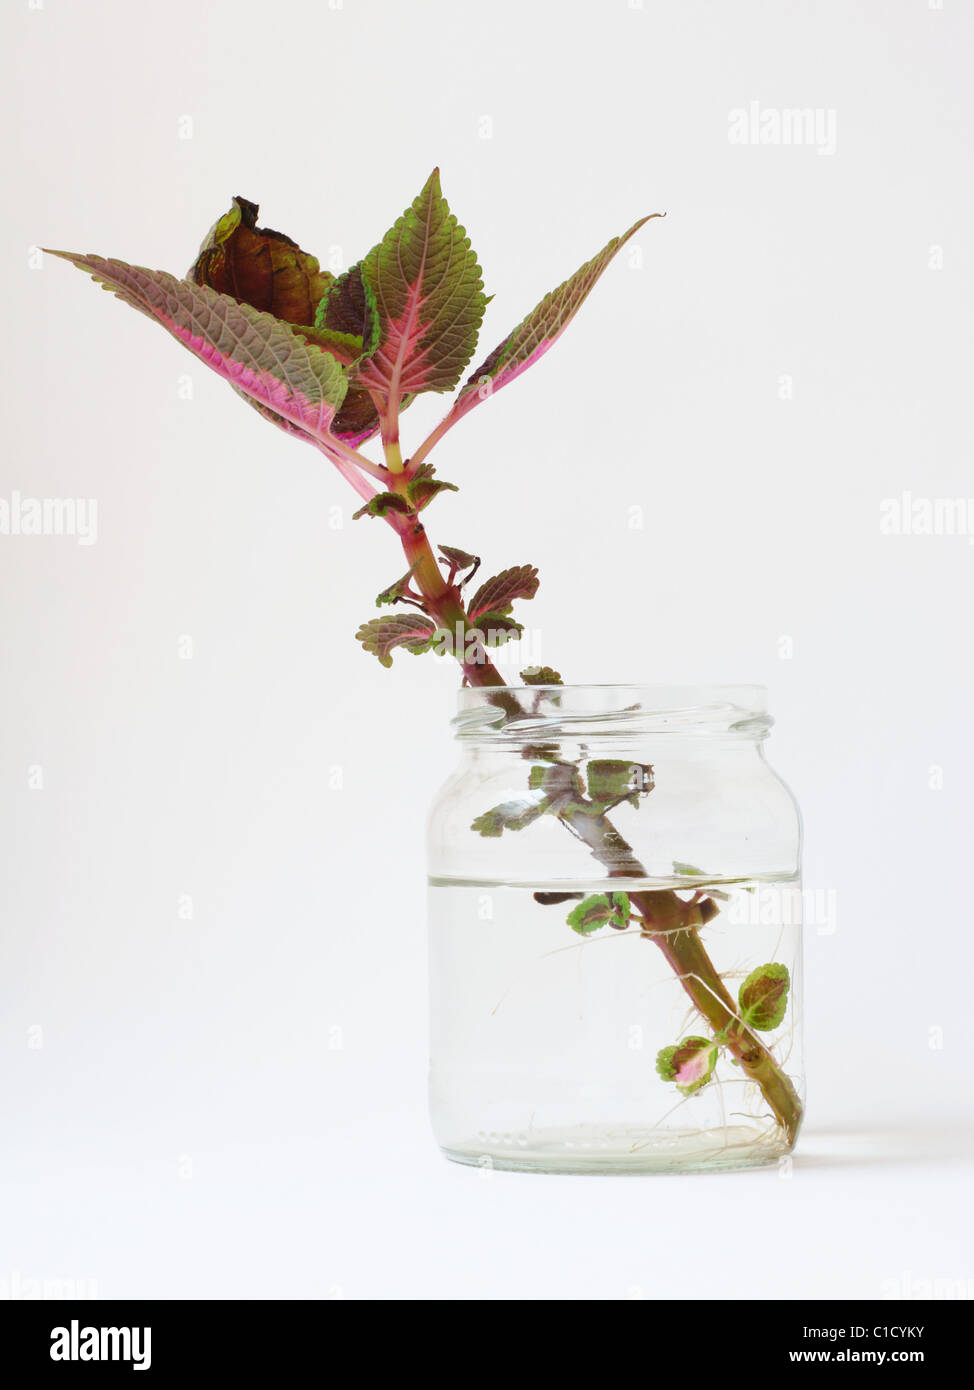 Growth of new life concept Stock Photo